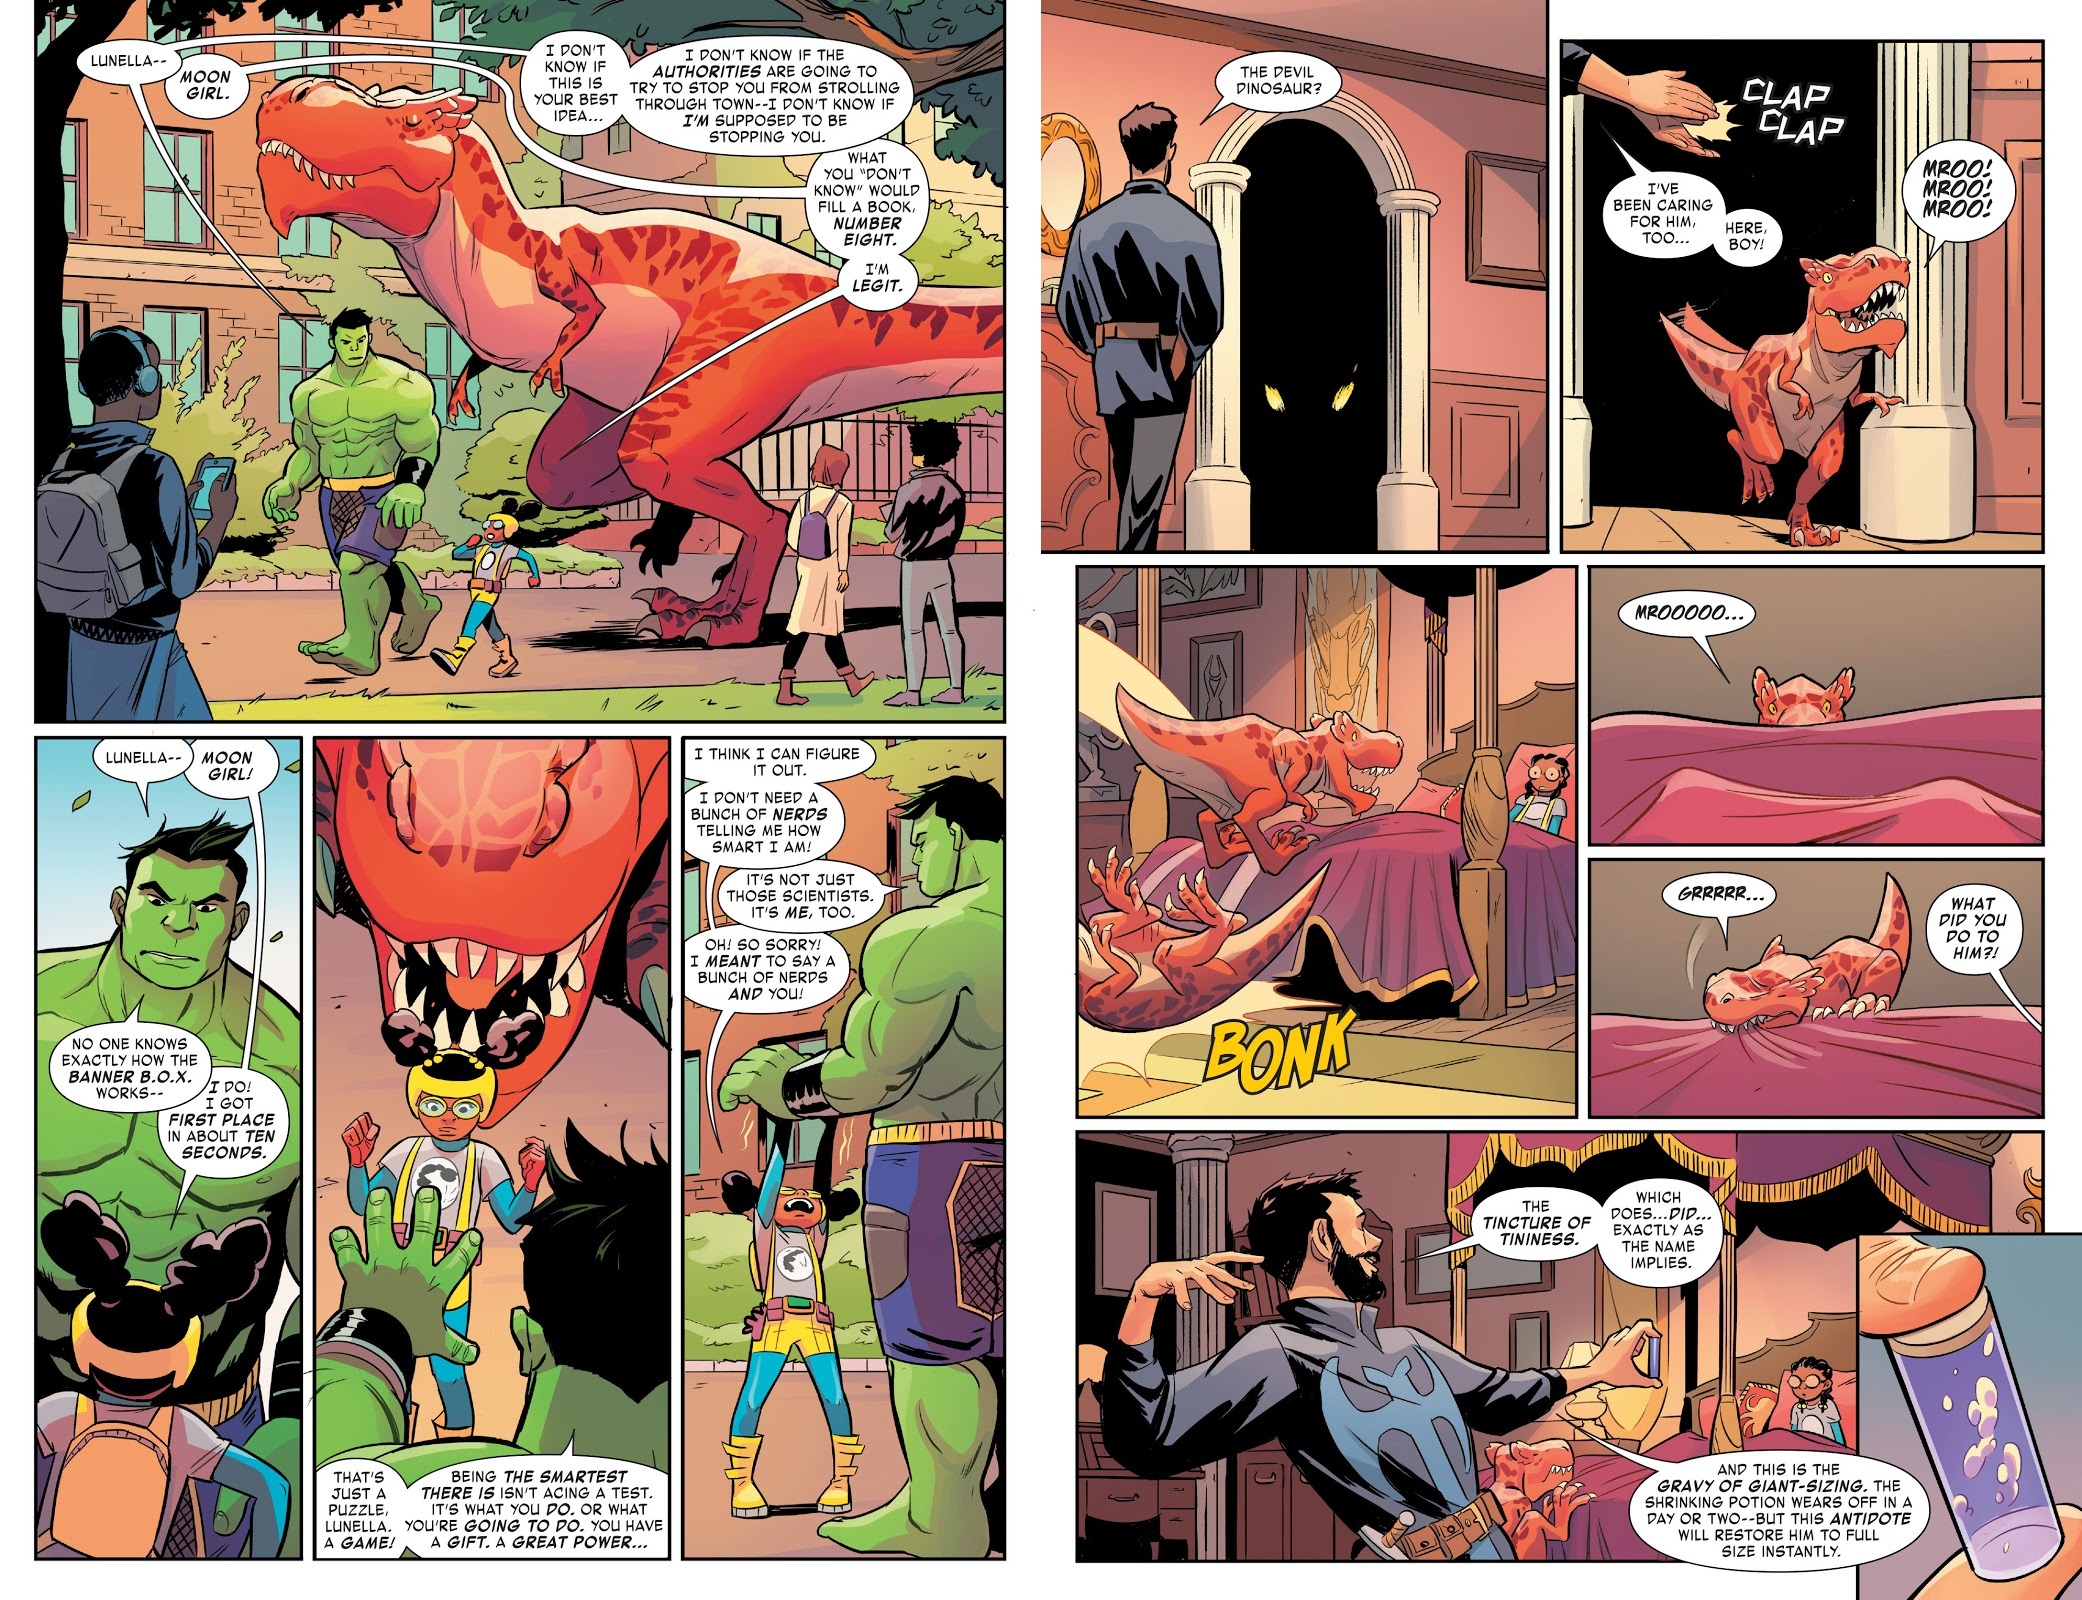 Moon Girl and Devil Dinosaur The Smartest There Is